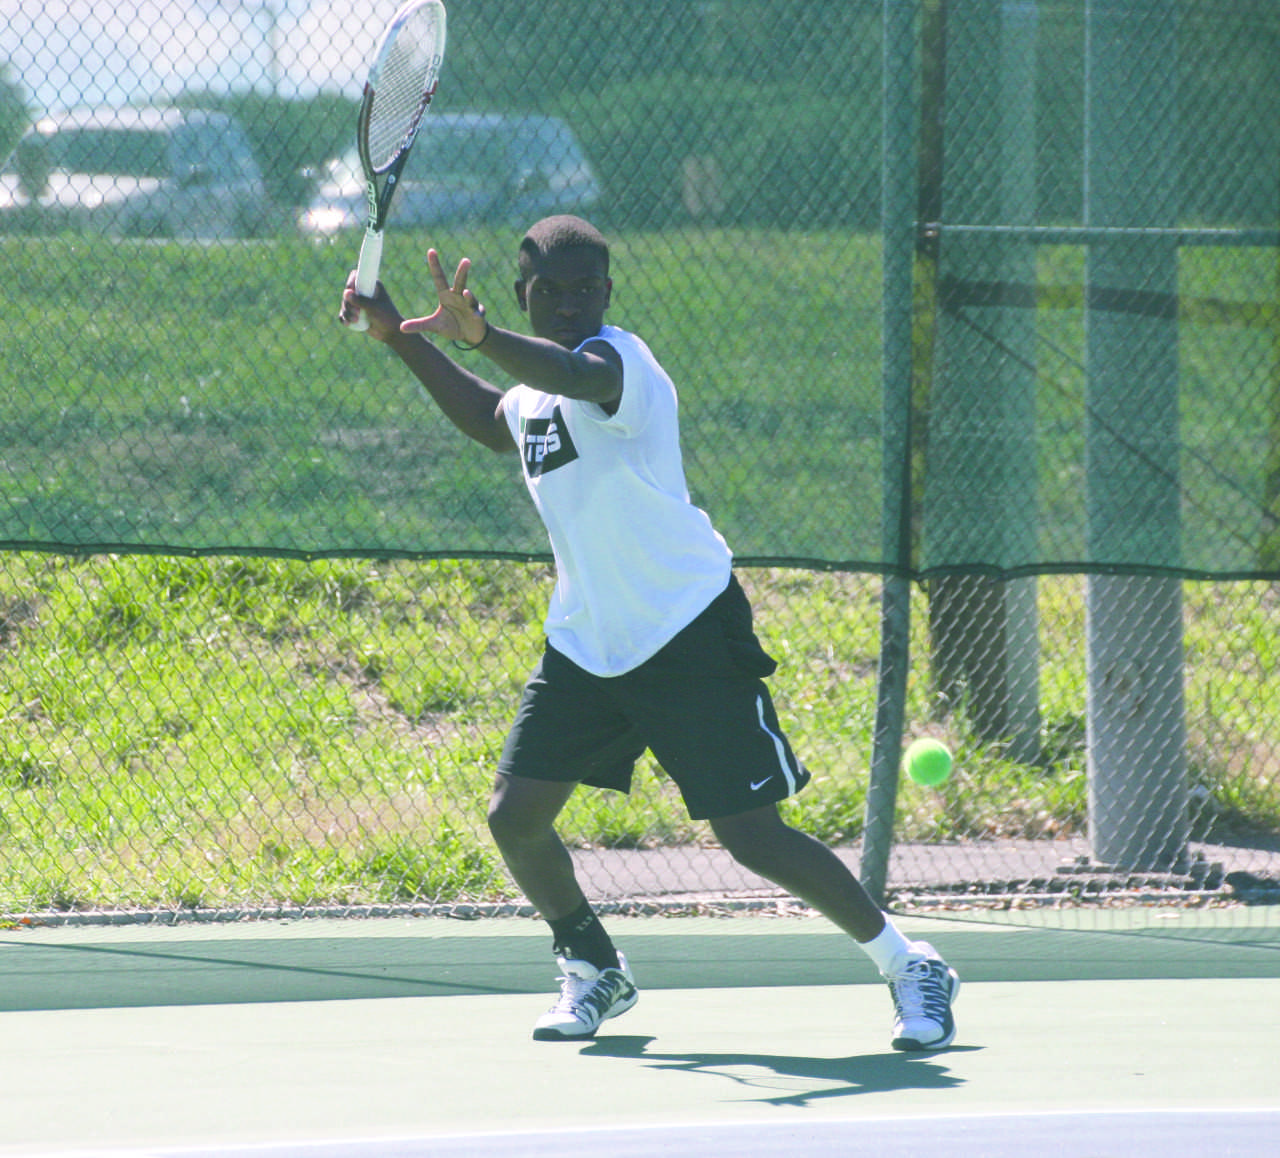 Top ranked player, Saurombe from Zimbabwe takes up challenge at nationals